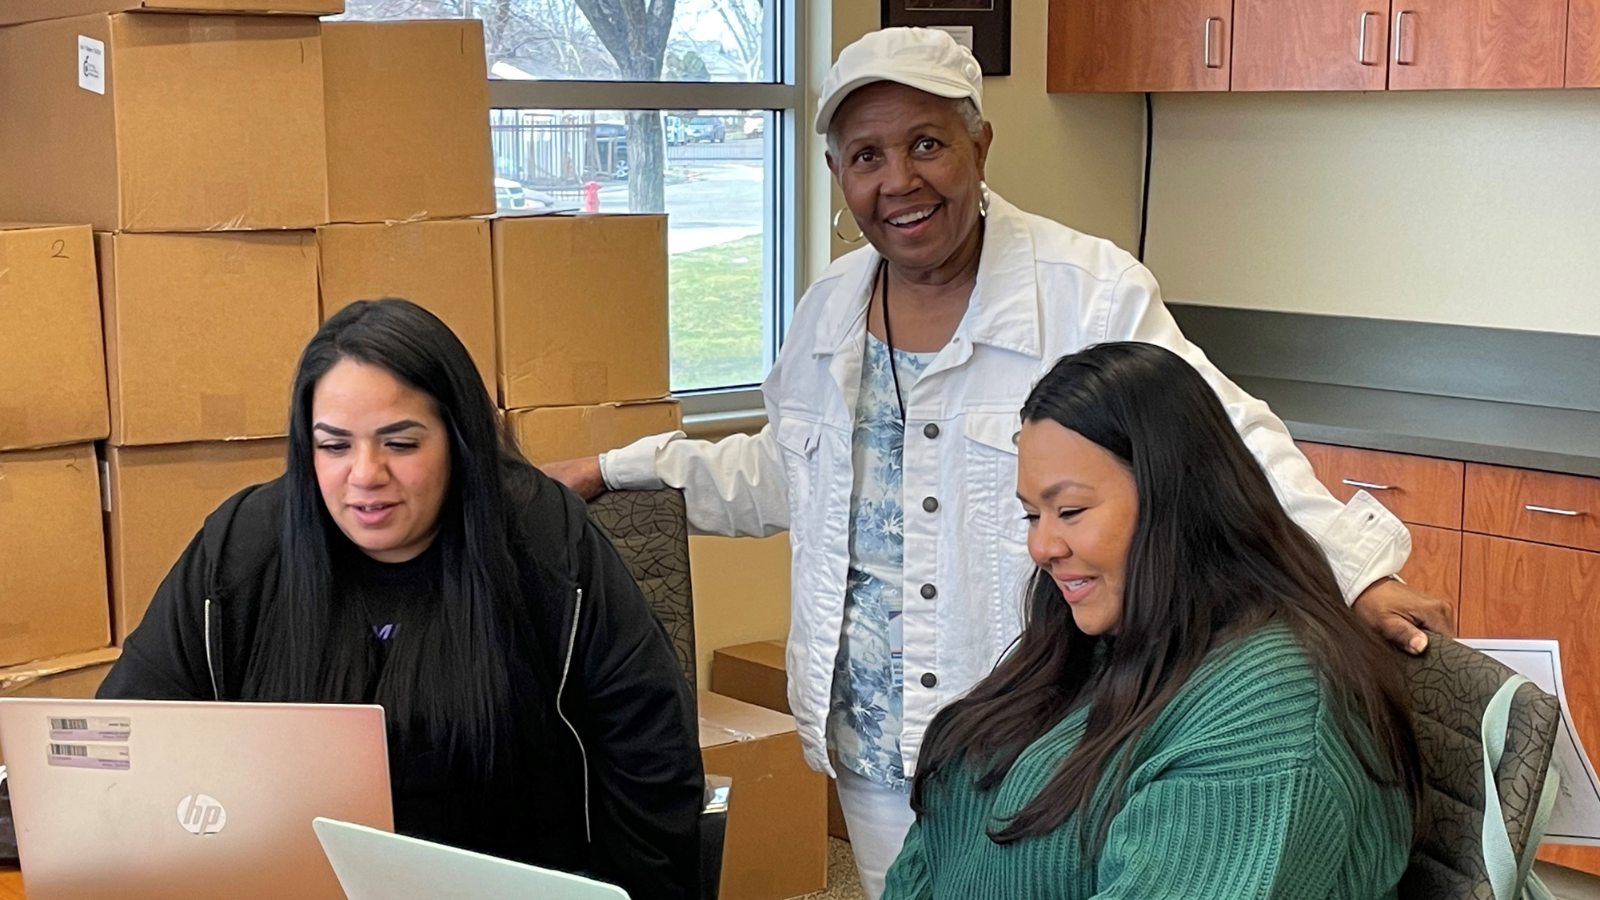 Photo caption: Generations Serving Together, Fresno working together to develop lesson plans for the young adults at Fresno EOC LCC YouthBuild Charter School.